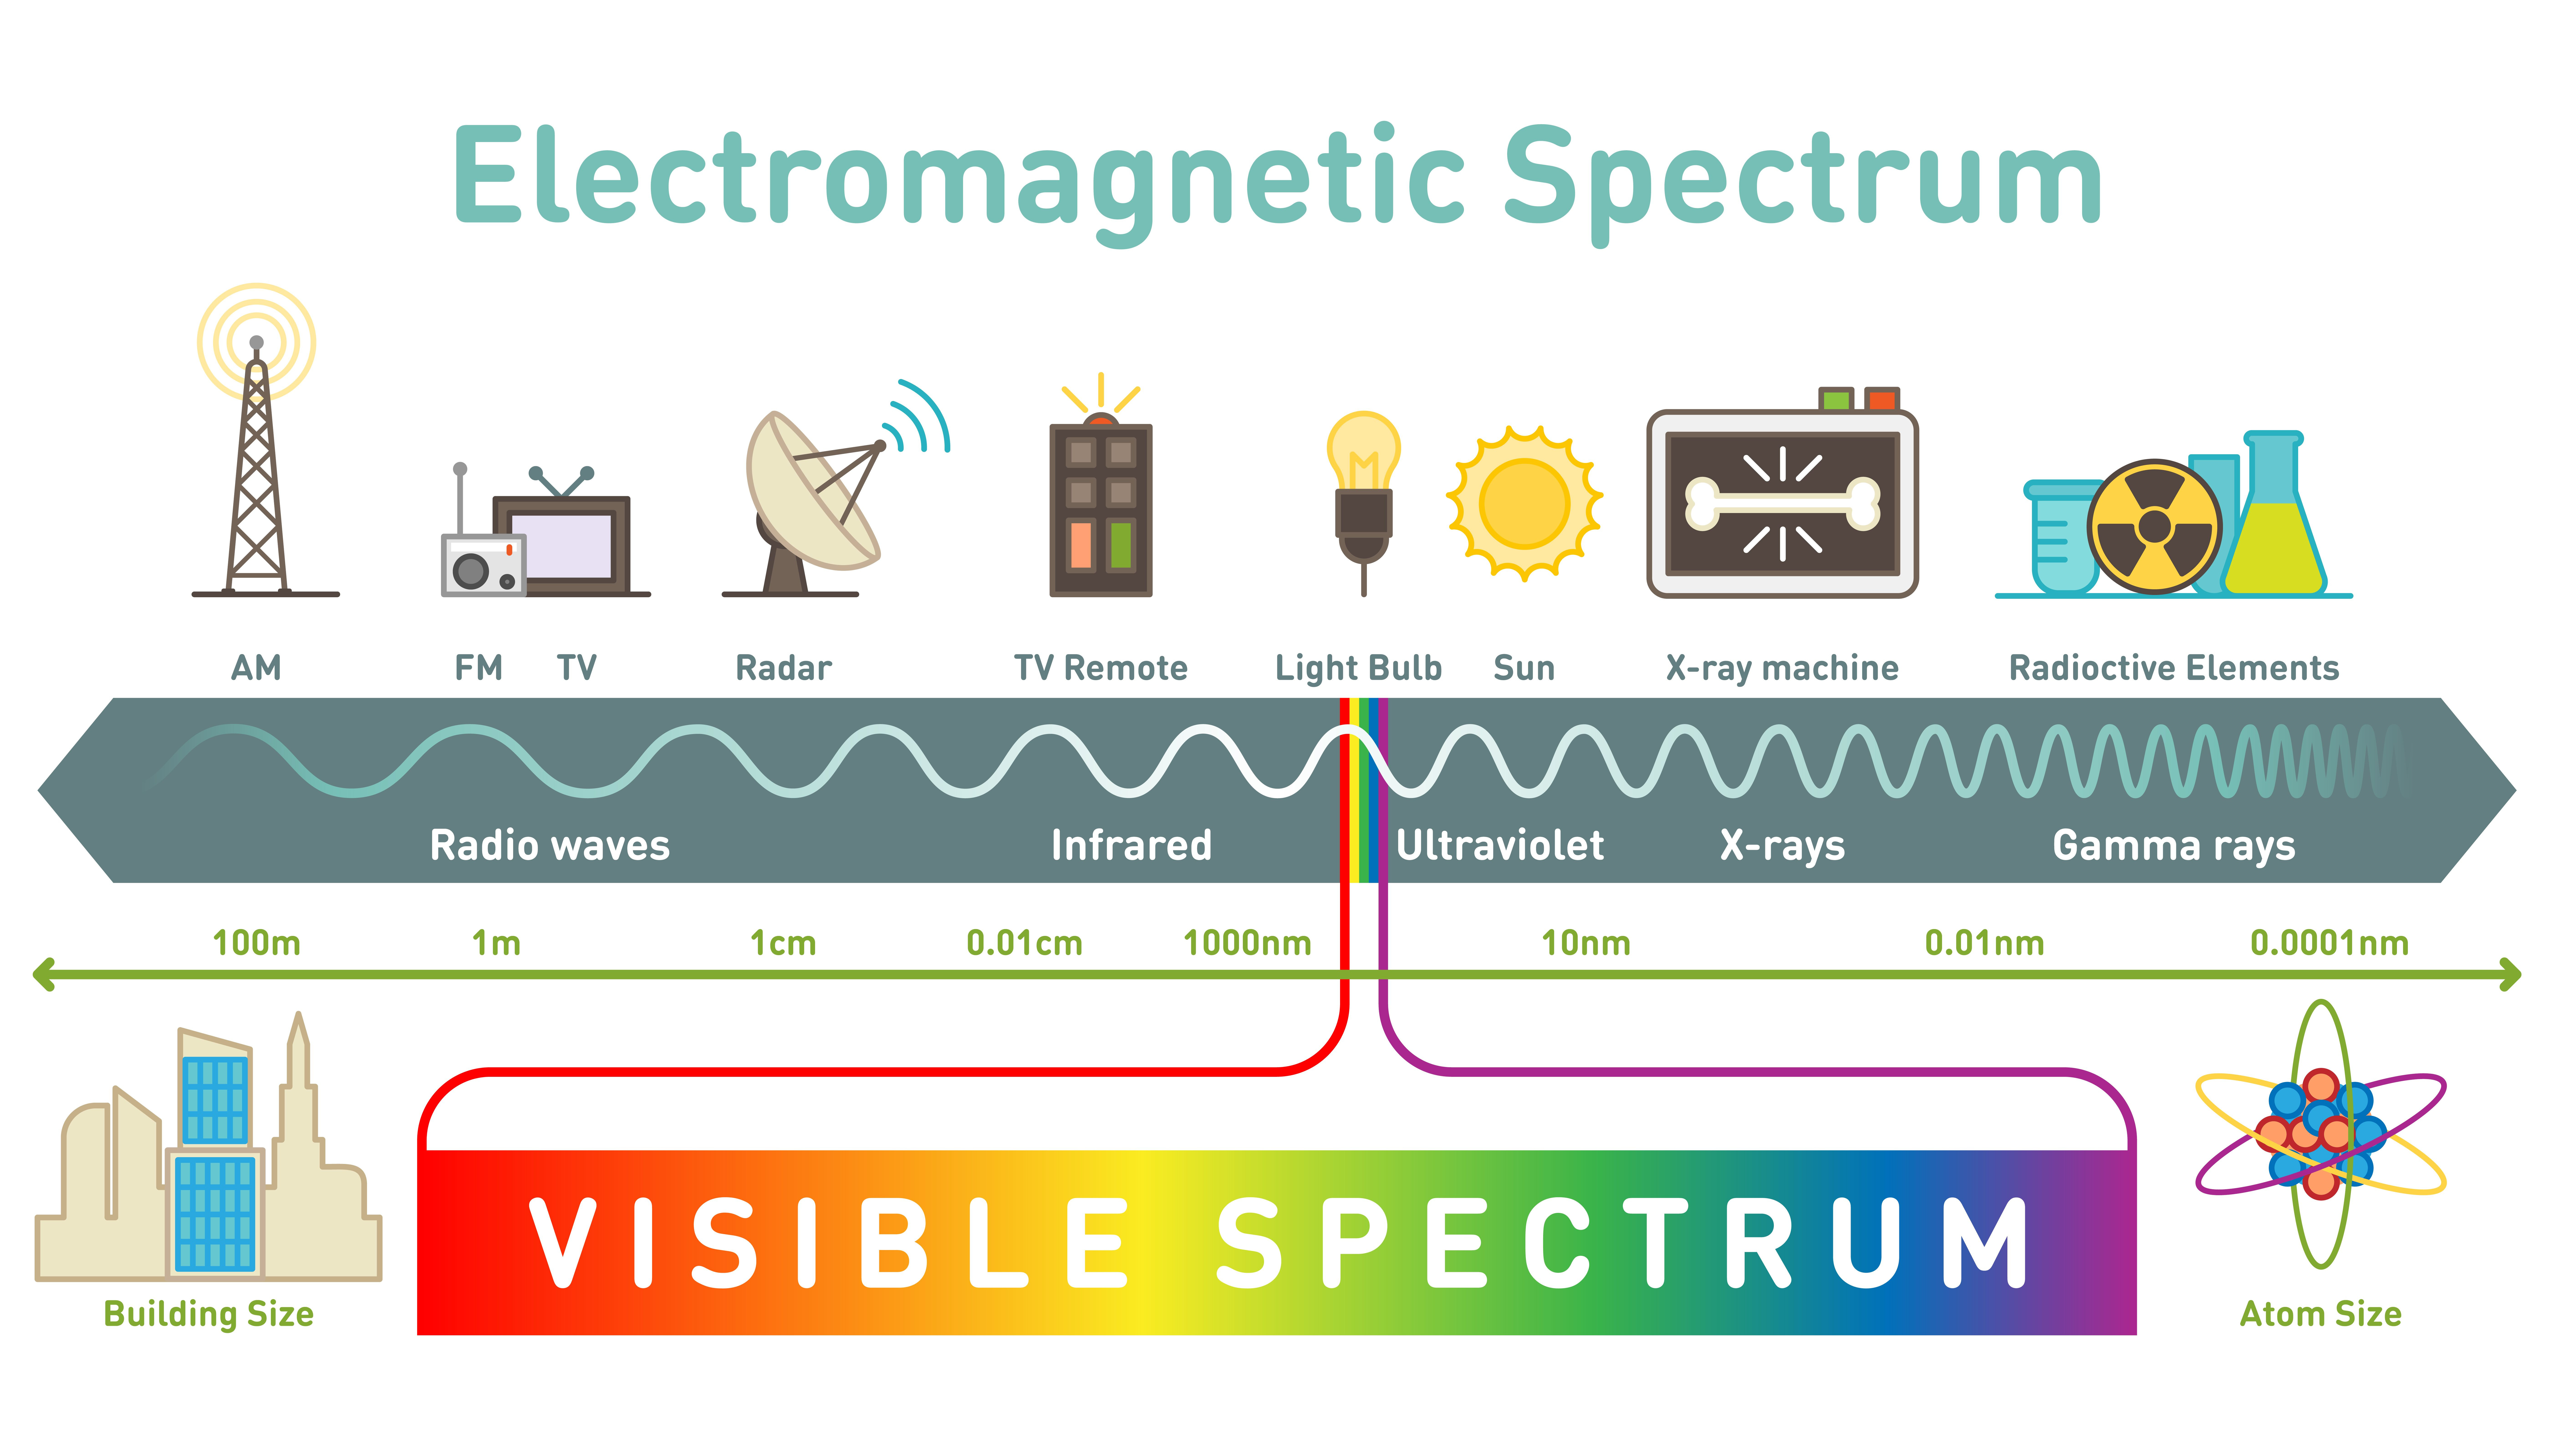 The electromagnetic spectrum, from low energy radio waves to high energy gamma rays.